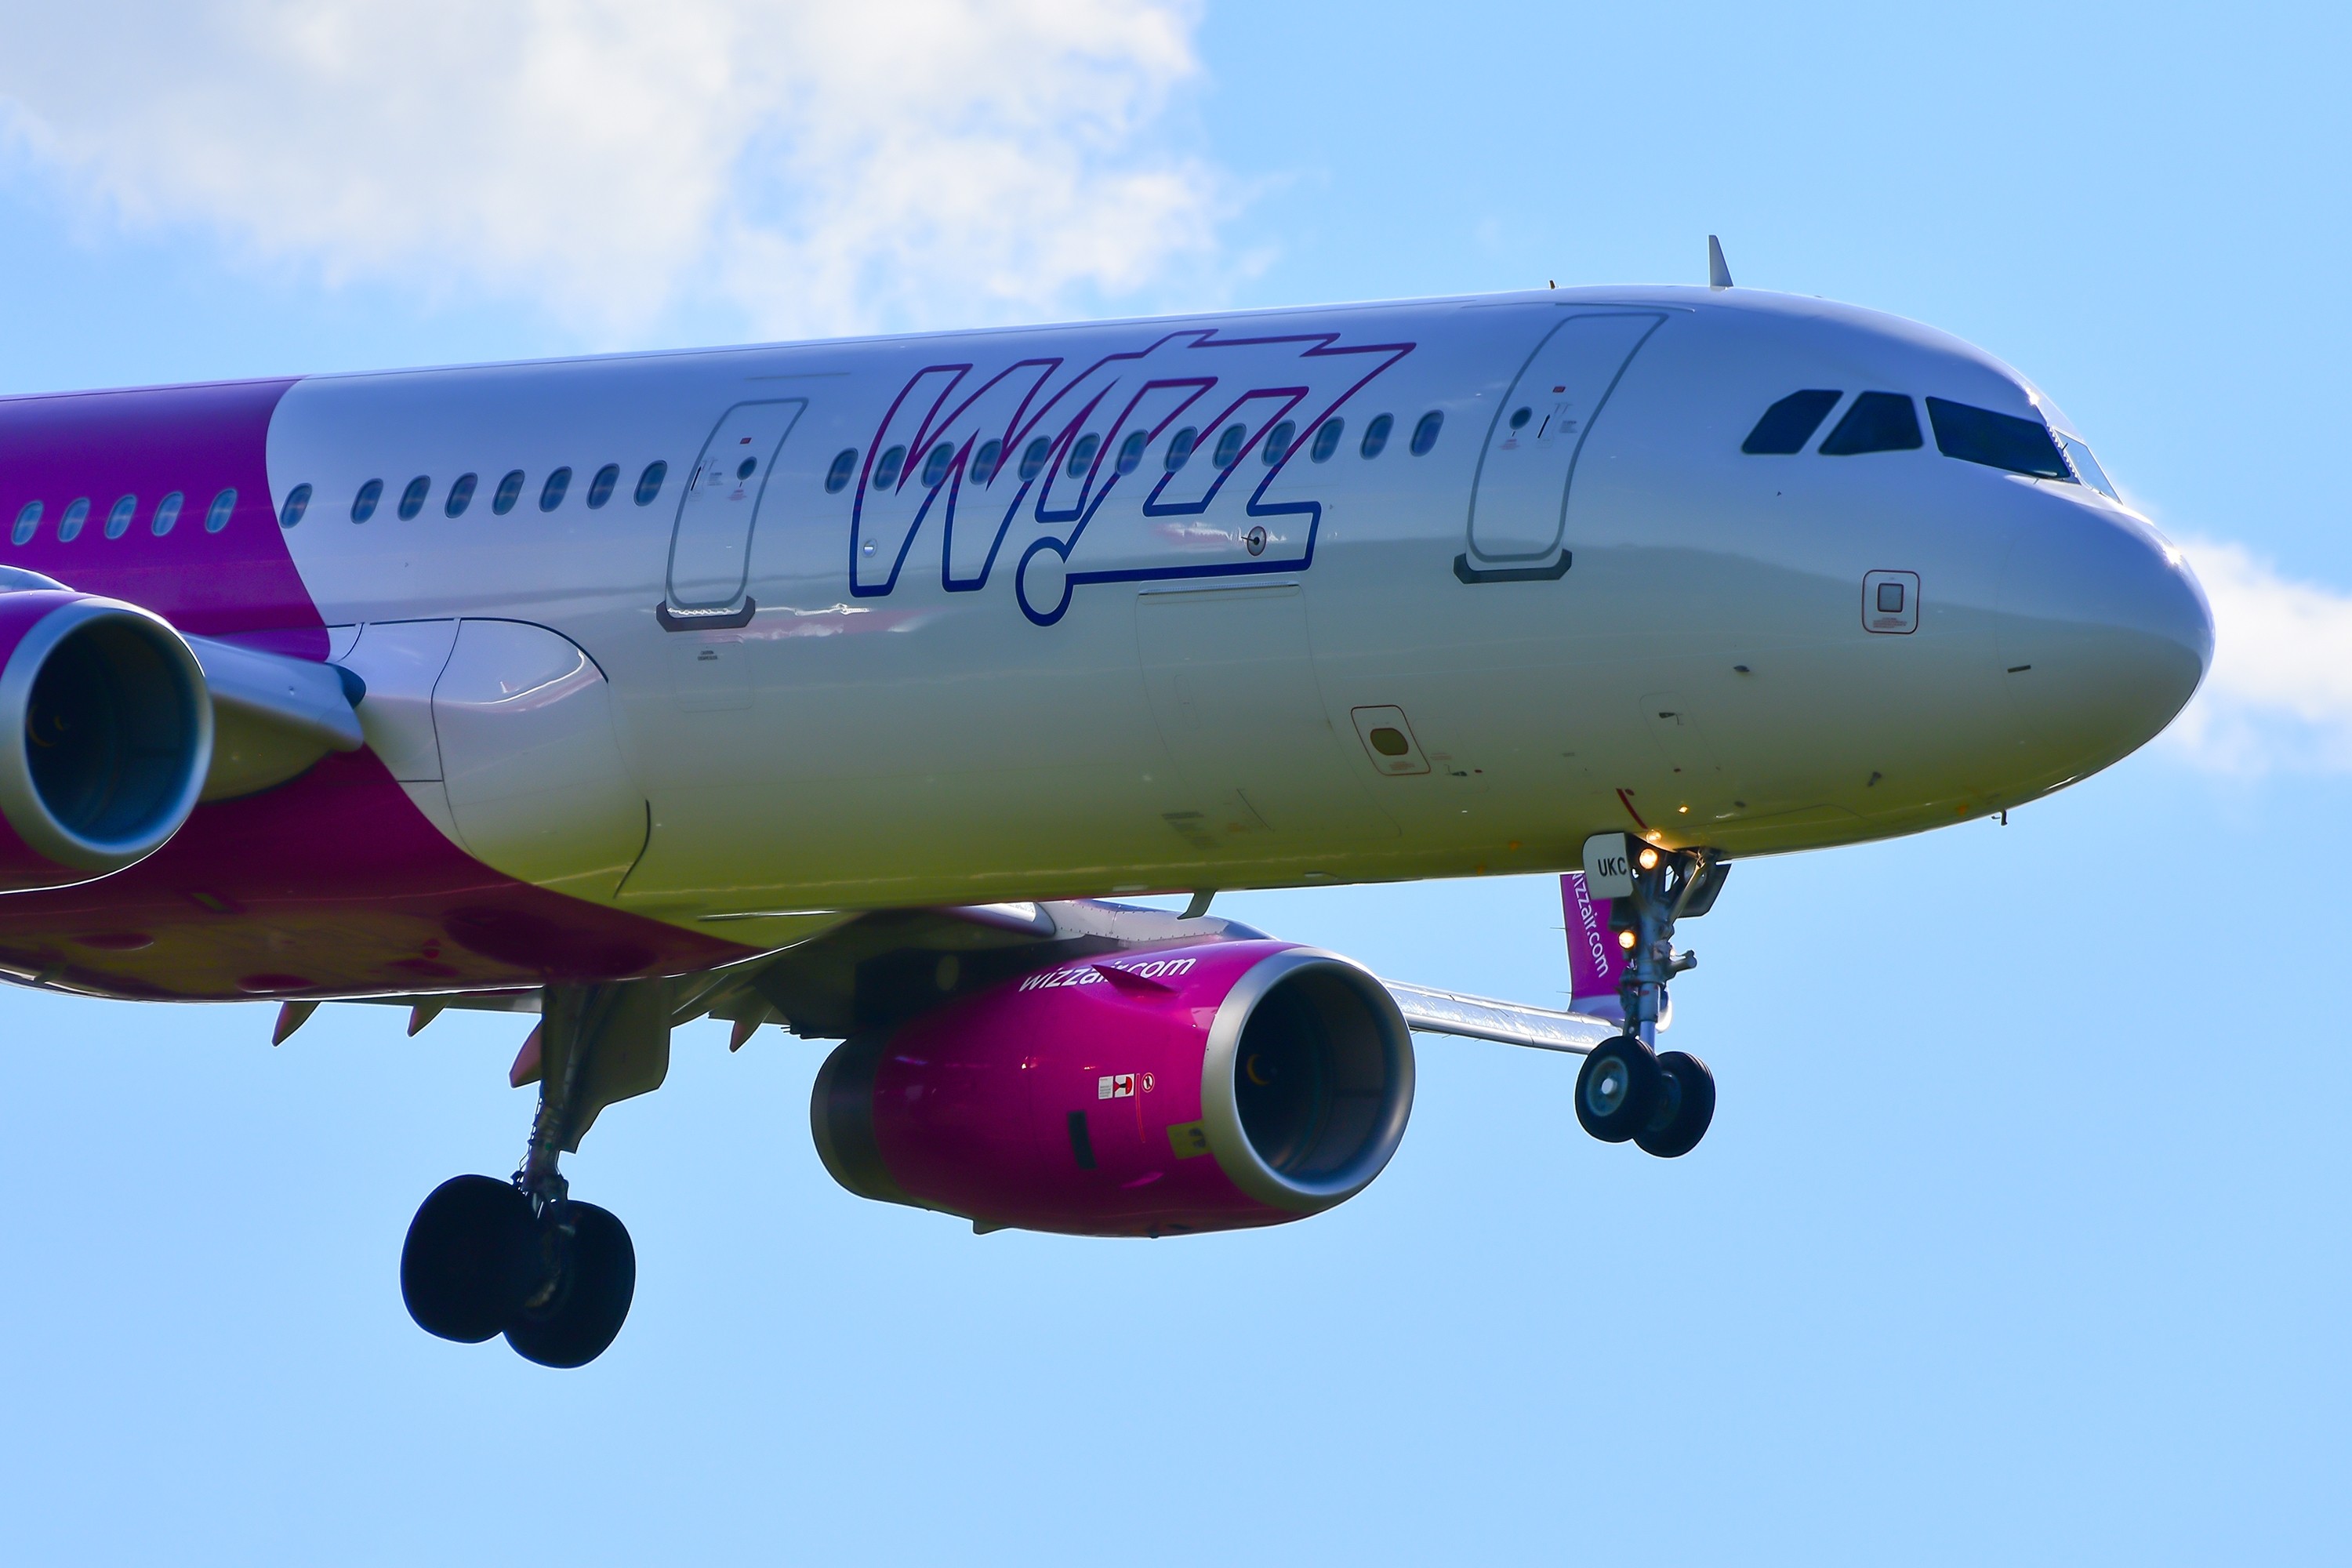 Wizz Air Airbus A321 over airport on May 21,2018 in Palanga, Lithuania.